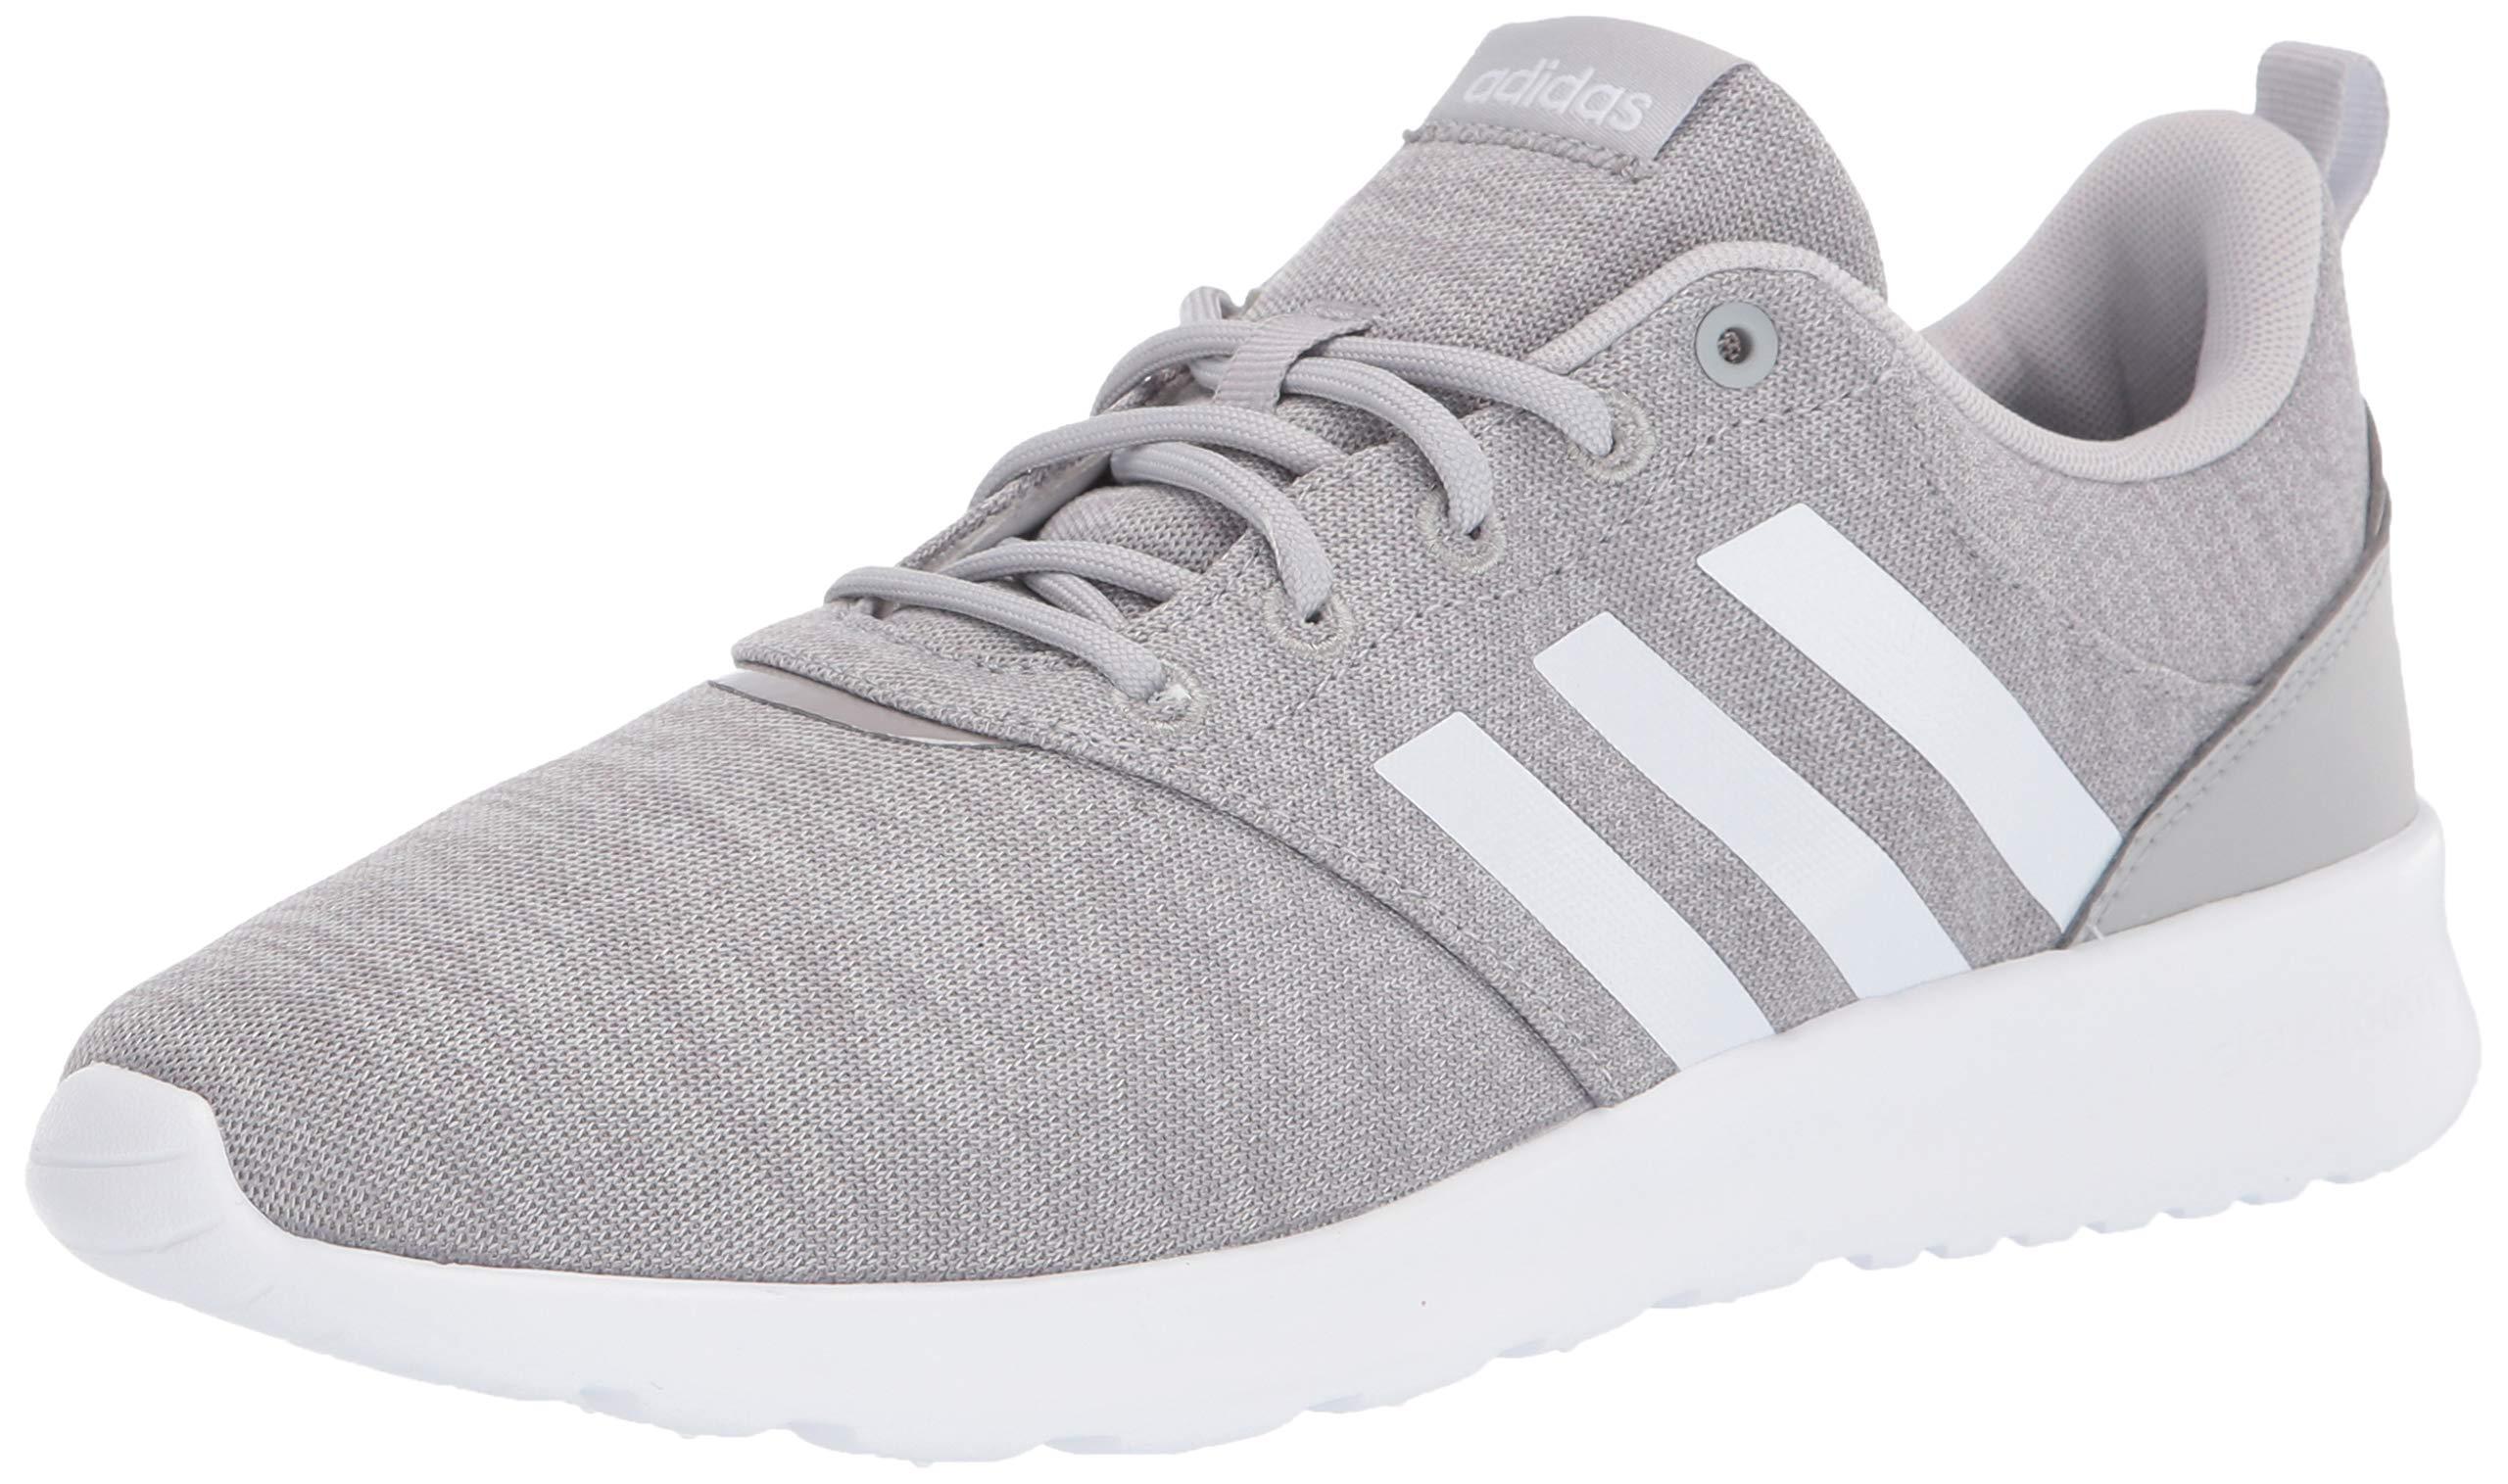 adidas Lace Qt Racer 2.0 Shoes in Grey/White/Light Granite (Gray) - Save  66% | Lyst